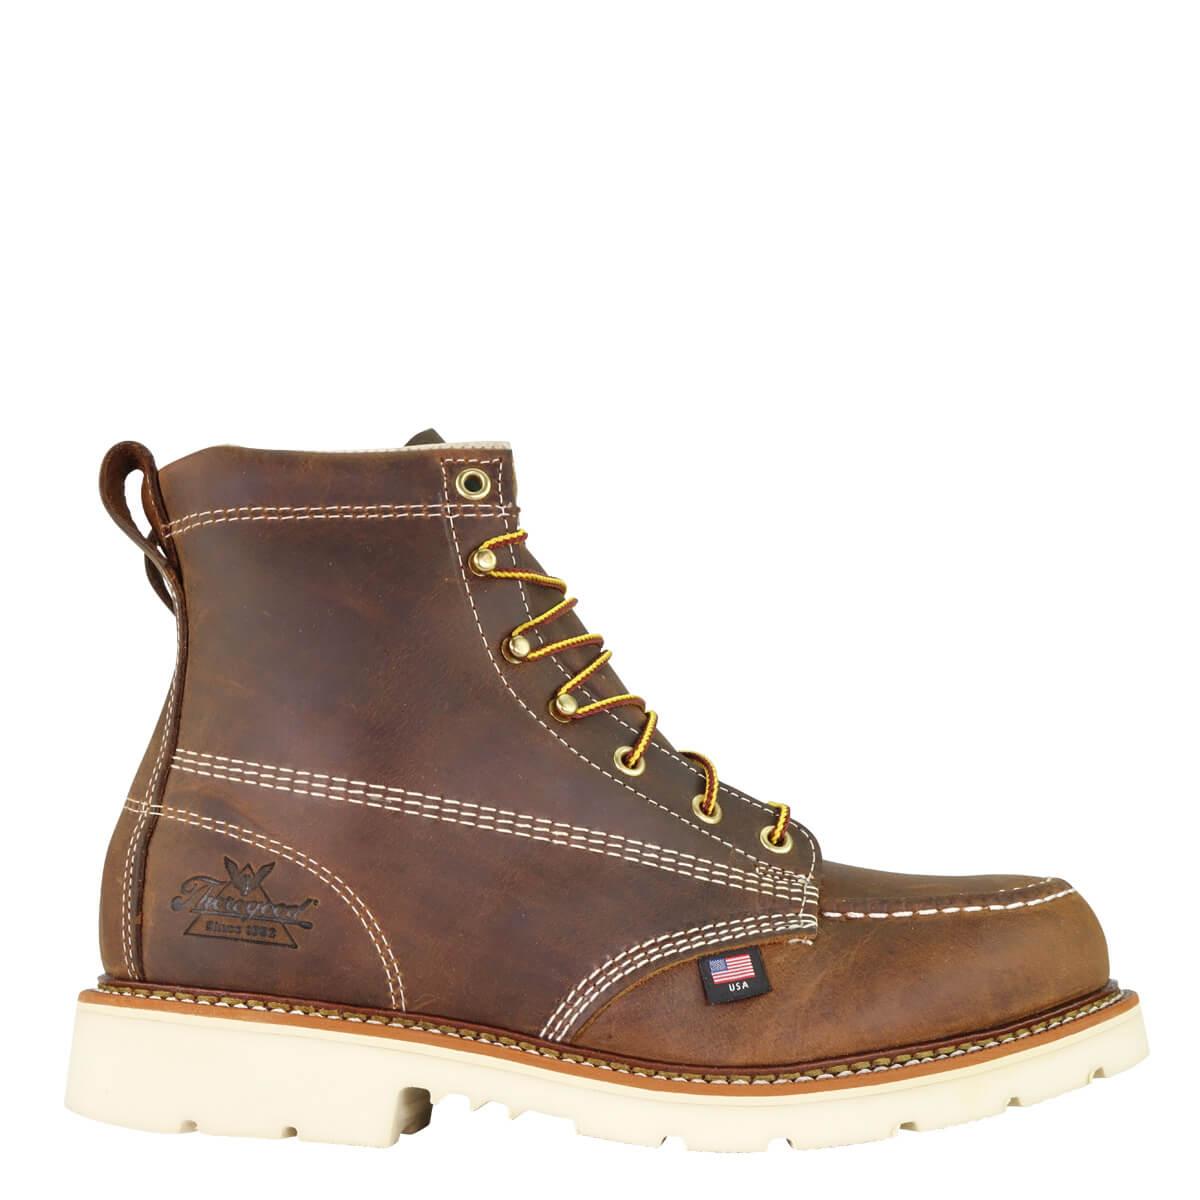 American Heritage - 6" Trail Crazyhorse - Moc Toe - MAXwear90 (Steel Toe) - Purpose-Built / Home of the Trades